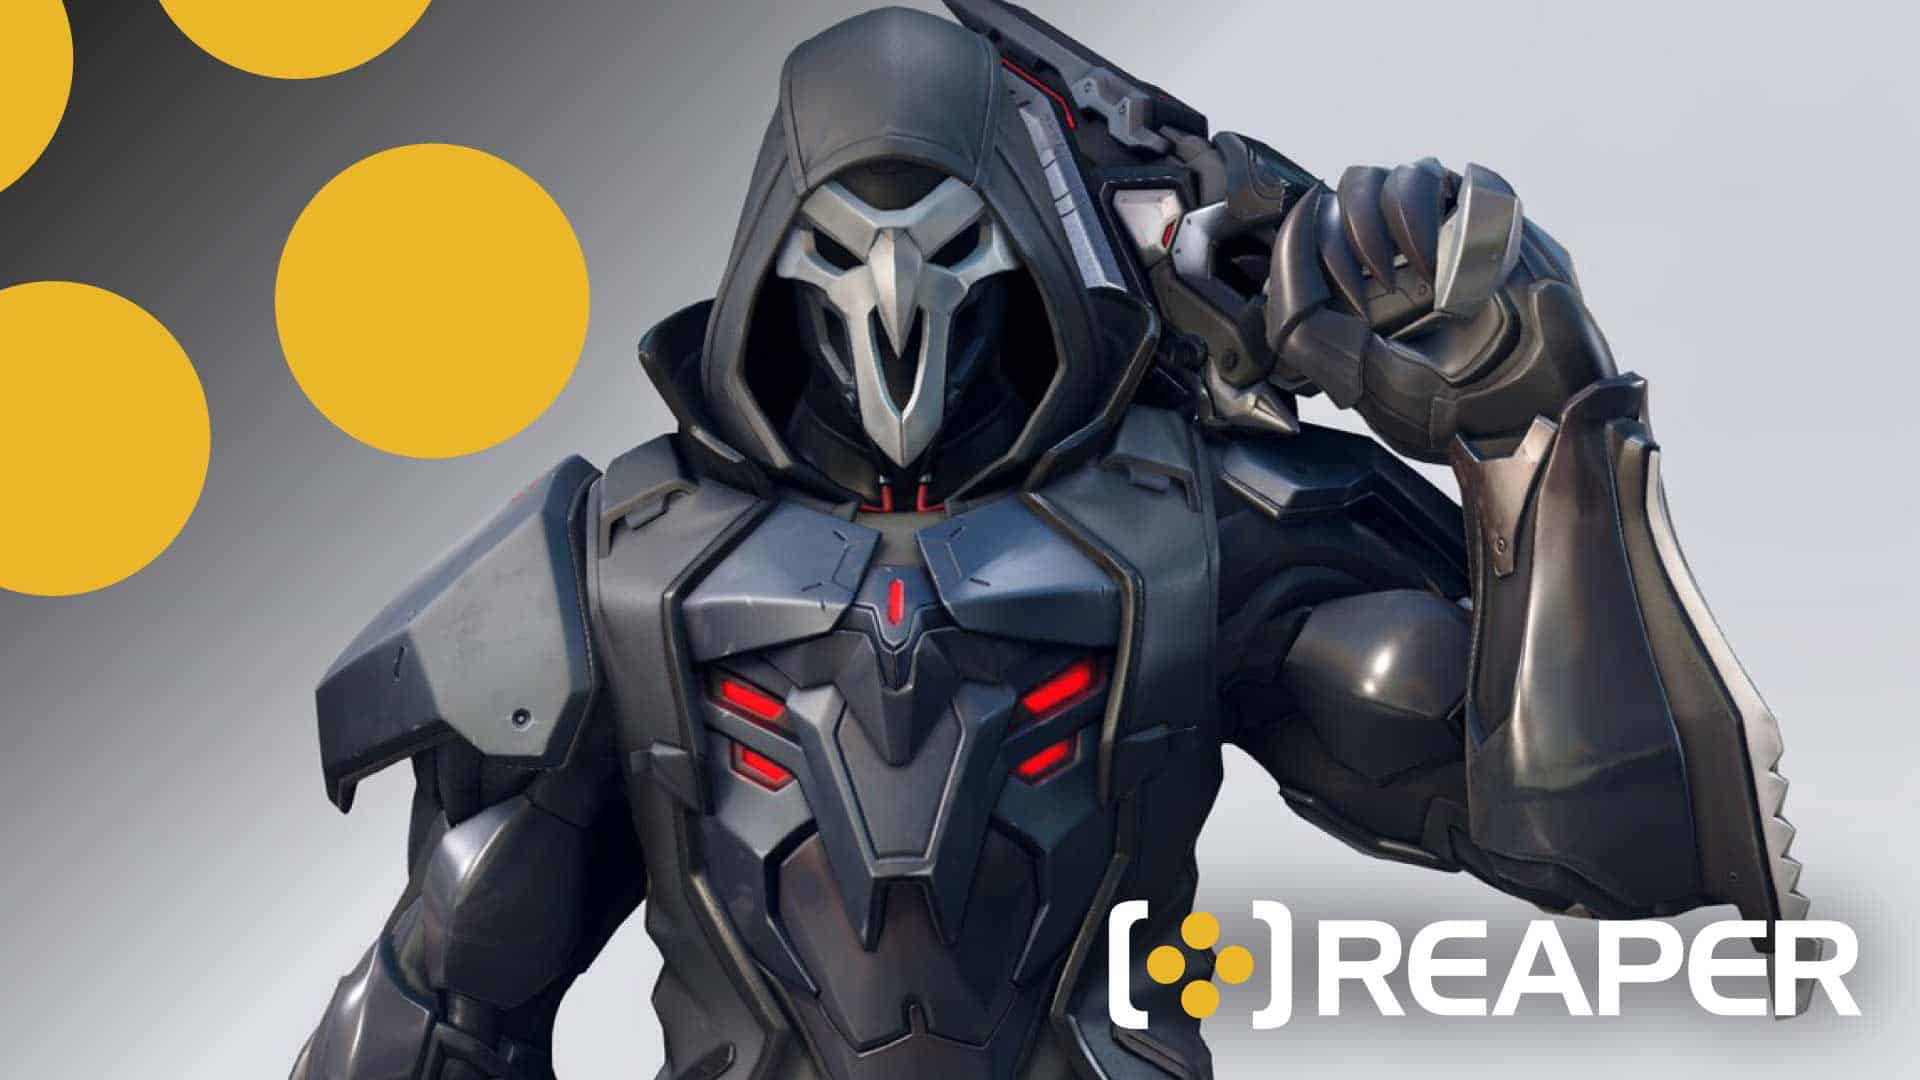 Reaper Overwatch 2 – Everything you need to know